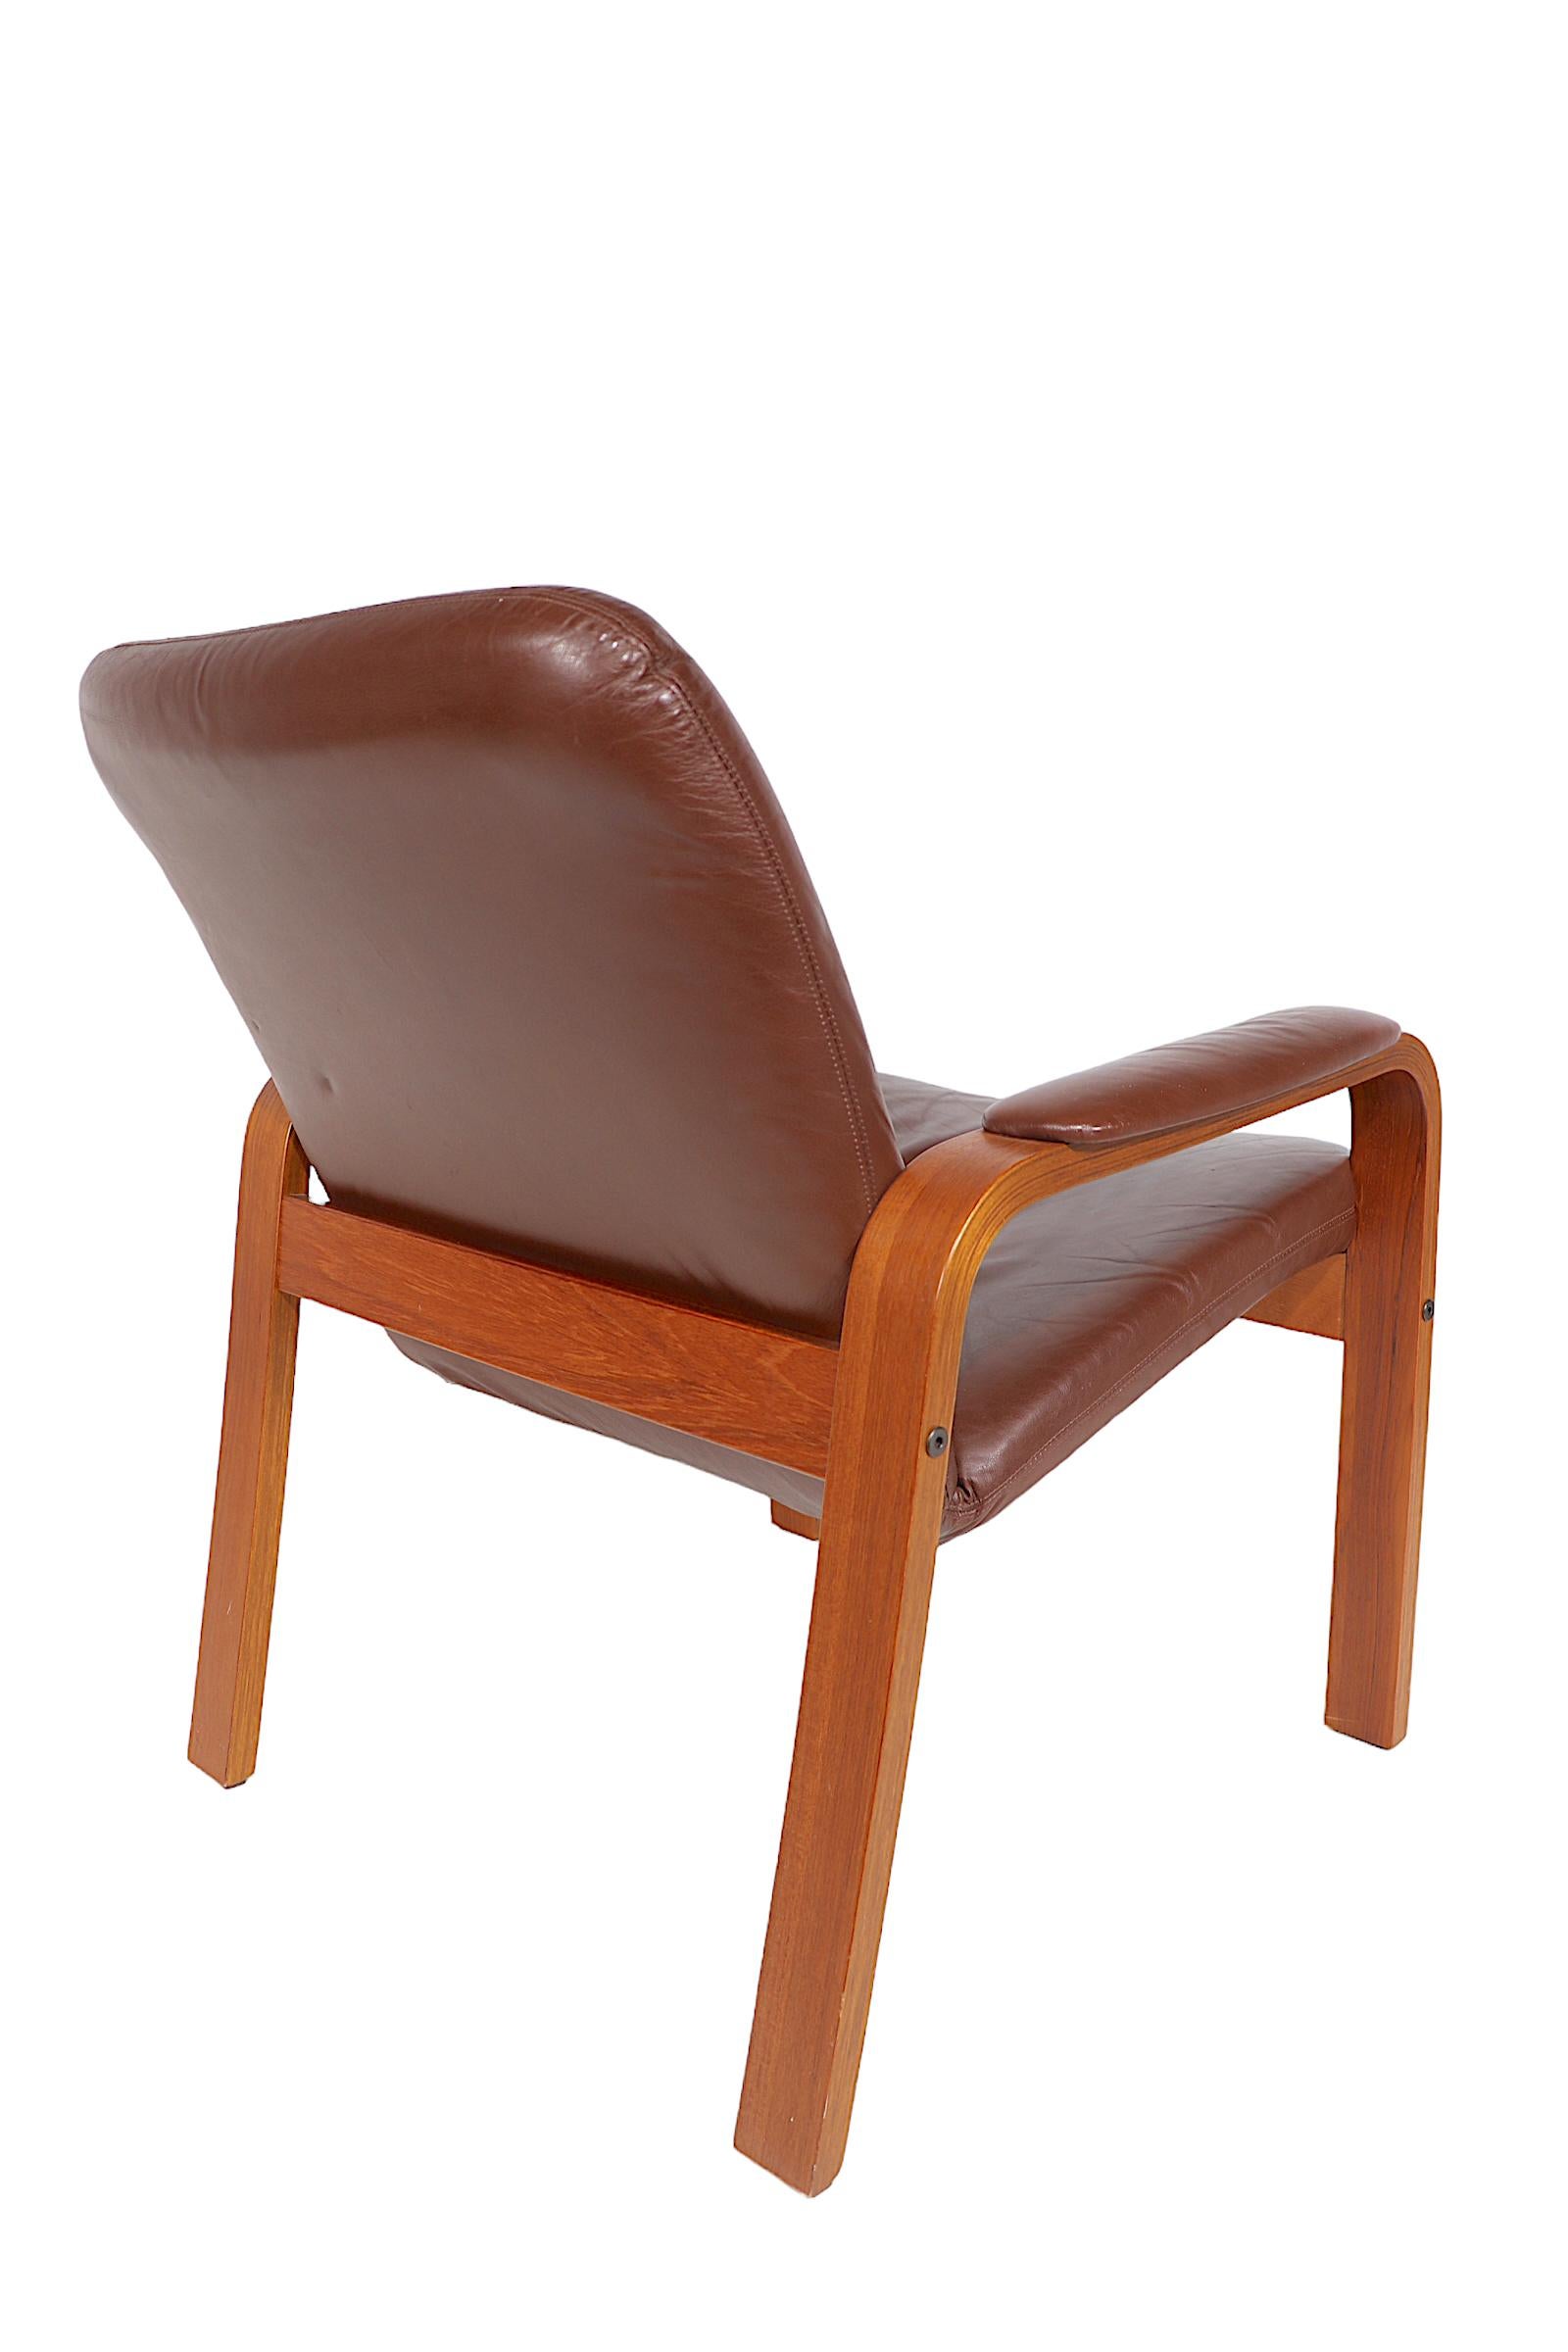 Pr. Scandinavian Mid Century Modern Lounge Arm Chairs Made in Norway by Ekorness For Sale 9